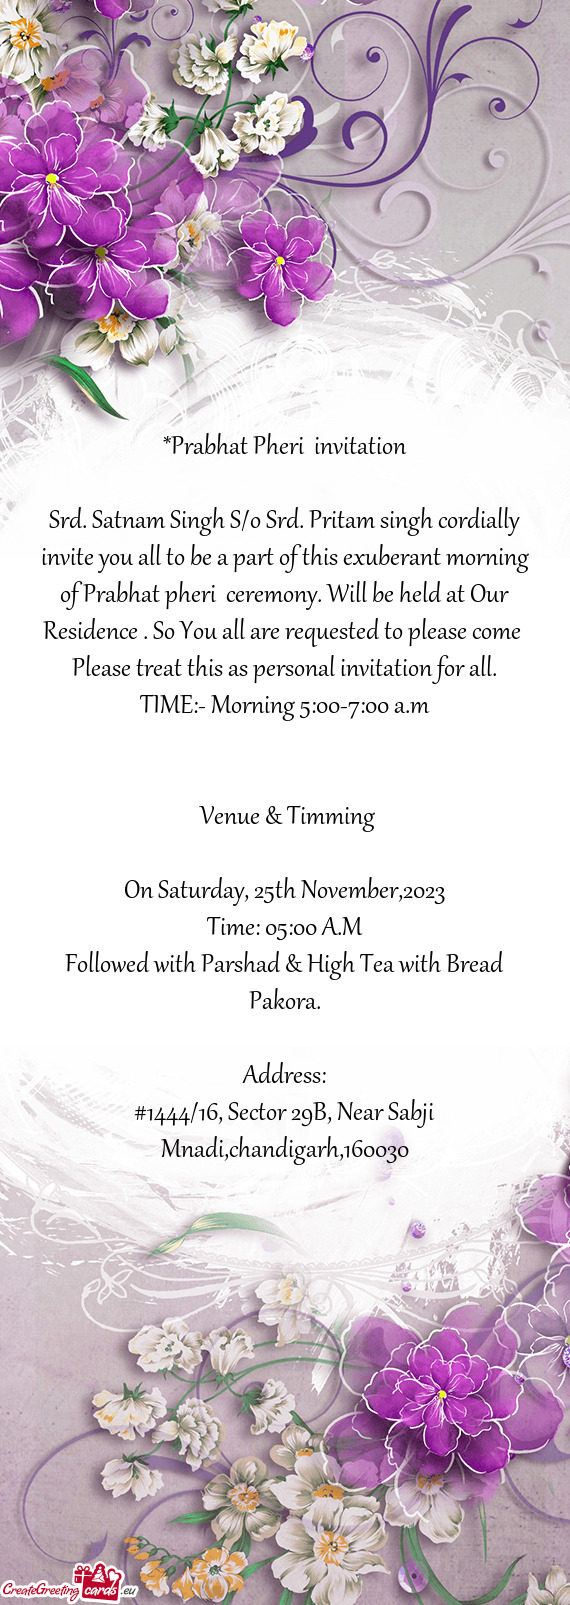 Srd. Satnam Singh S/o Srd. Pritam singh cordially invite you all to be a part of this exuberant morn